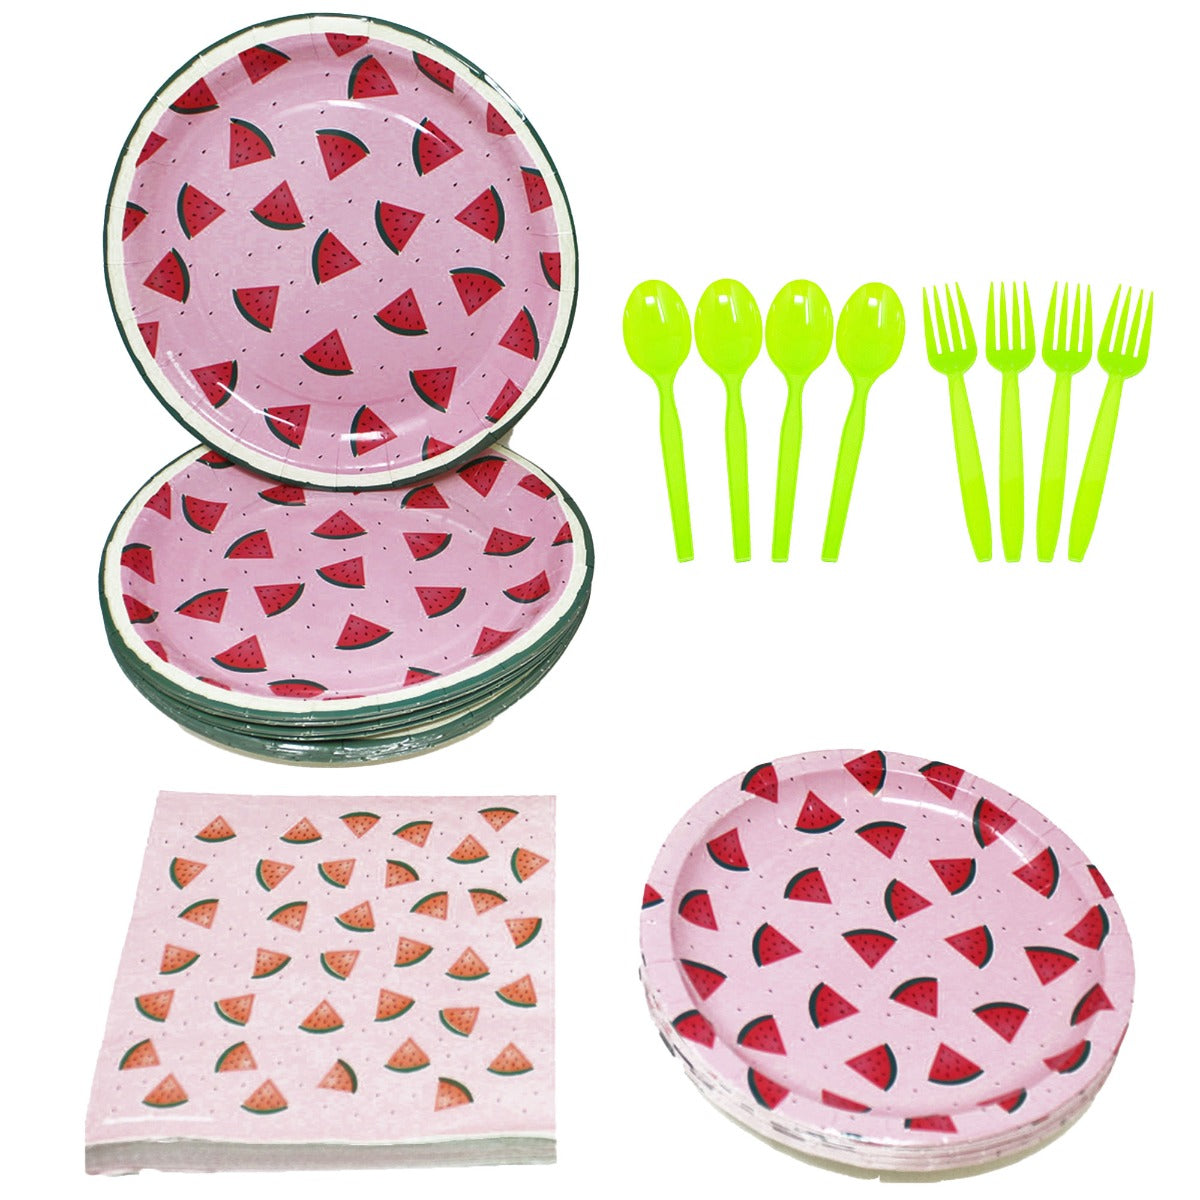 watermelon party supplies
watermelon party decorations
watermelon birthday decorations
watermelon birthday
watermelon plates
watermelon party
watermelon decorations
watermelon napkins
watermelon birthday party supplies
watermelon decoration
wate